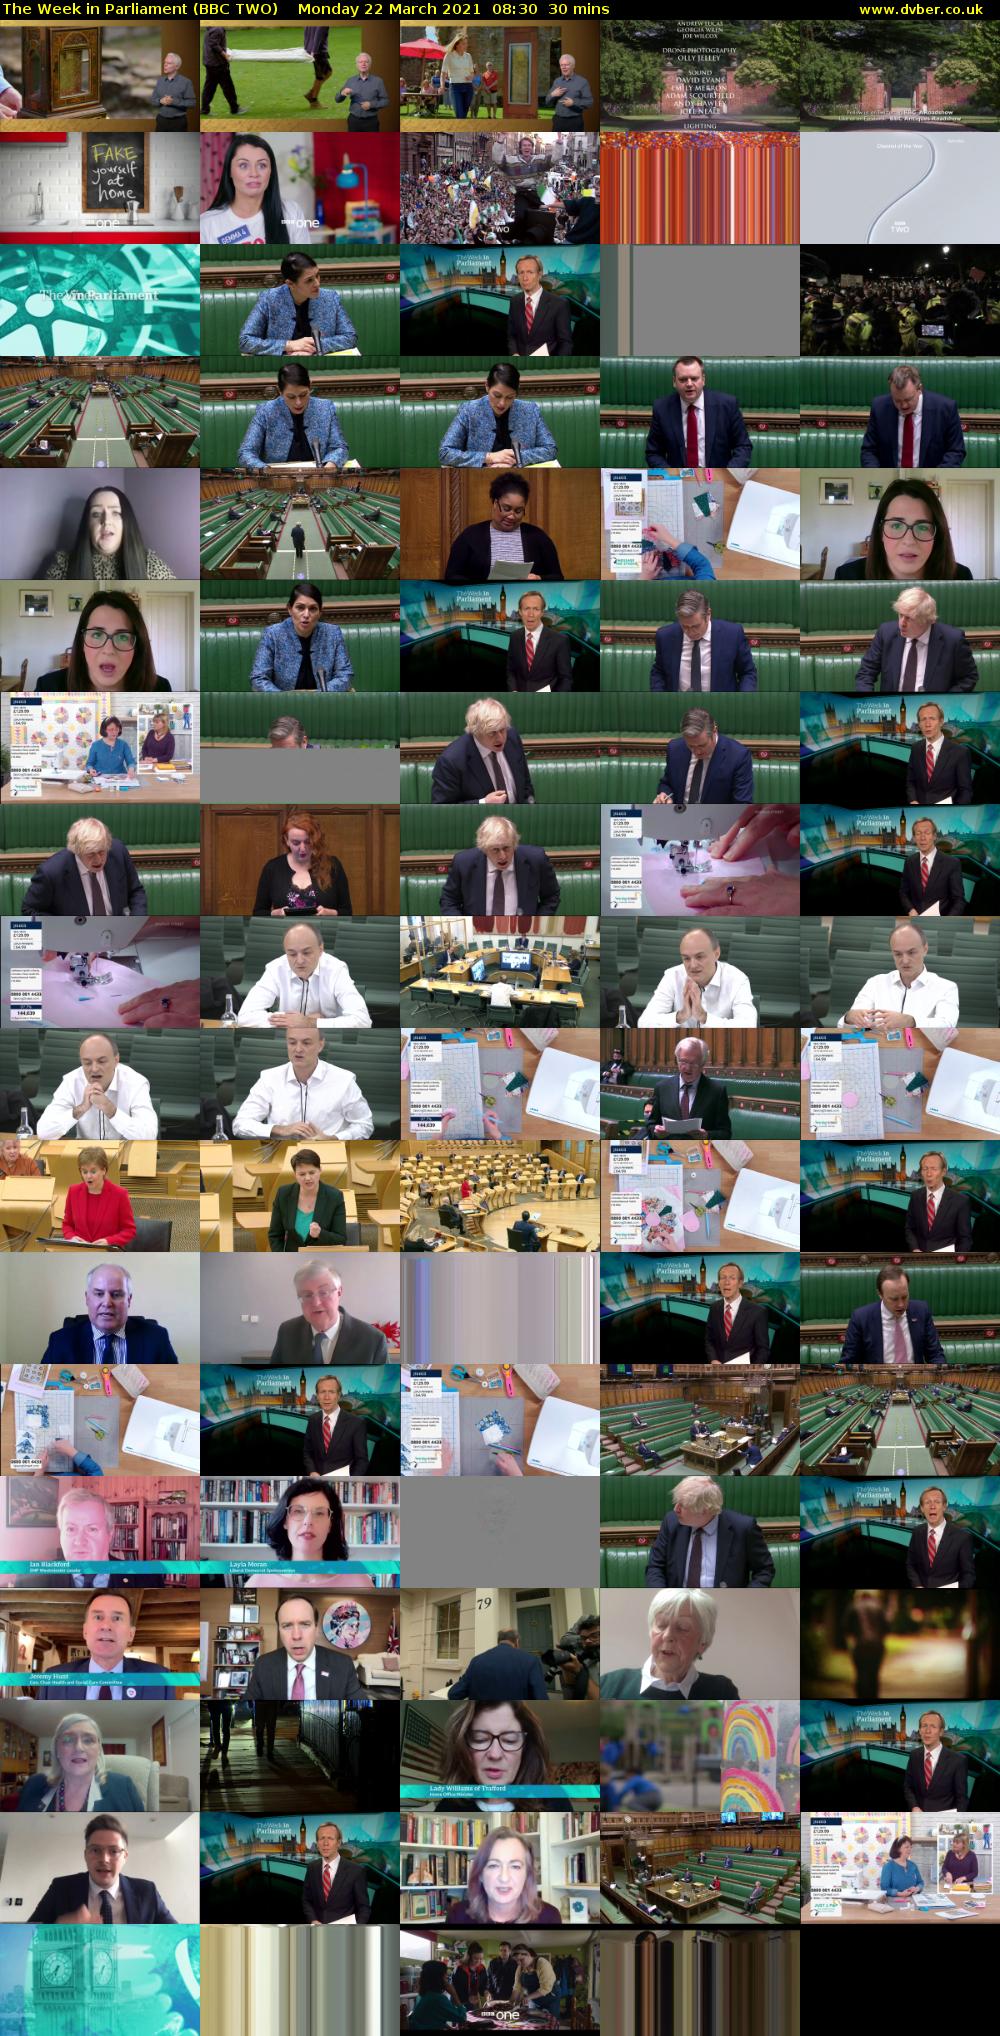 The Week in Parliament (BBC TWO) Monday 22 March 2021 08:30 - 09:00